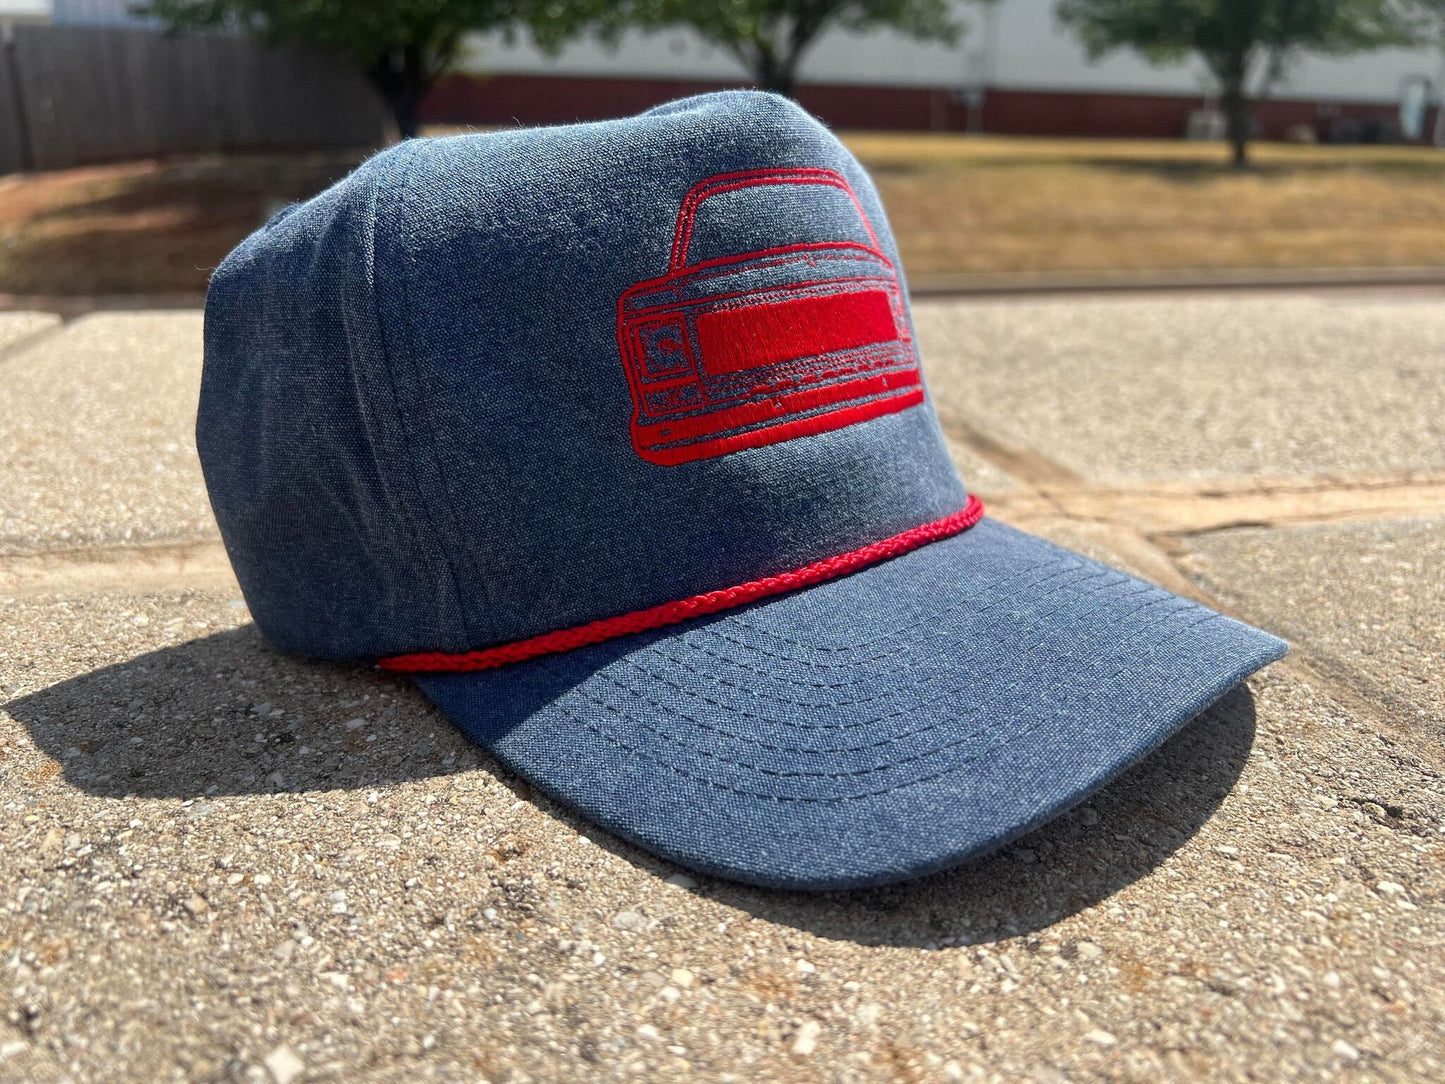 Vintage Squarebody Roundeye GMC Chevy Truck Mesh Trucker Hat by Oklahoma Customs - 7 Variations Available